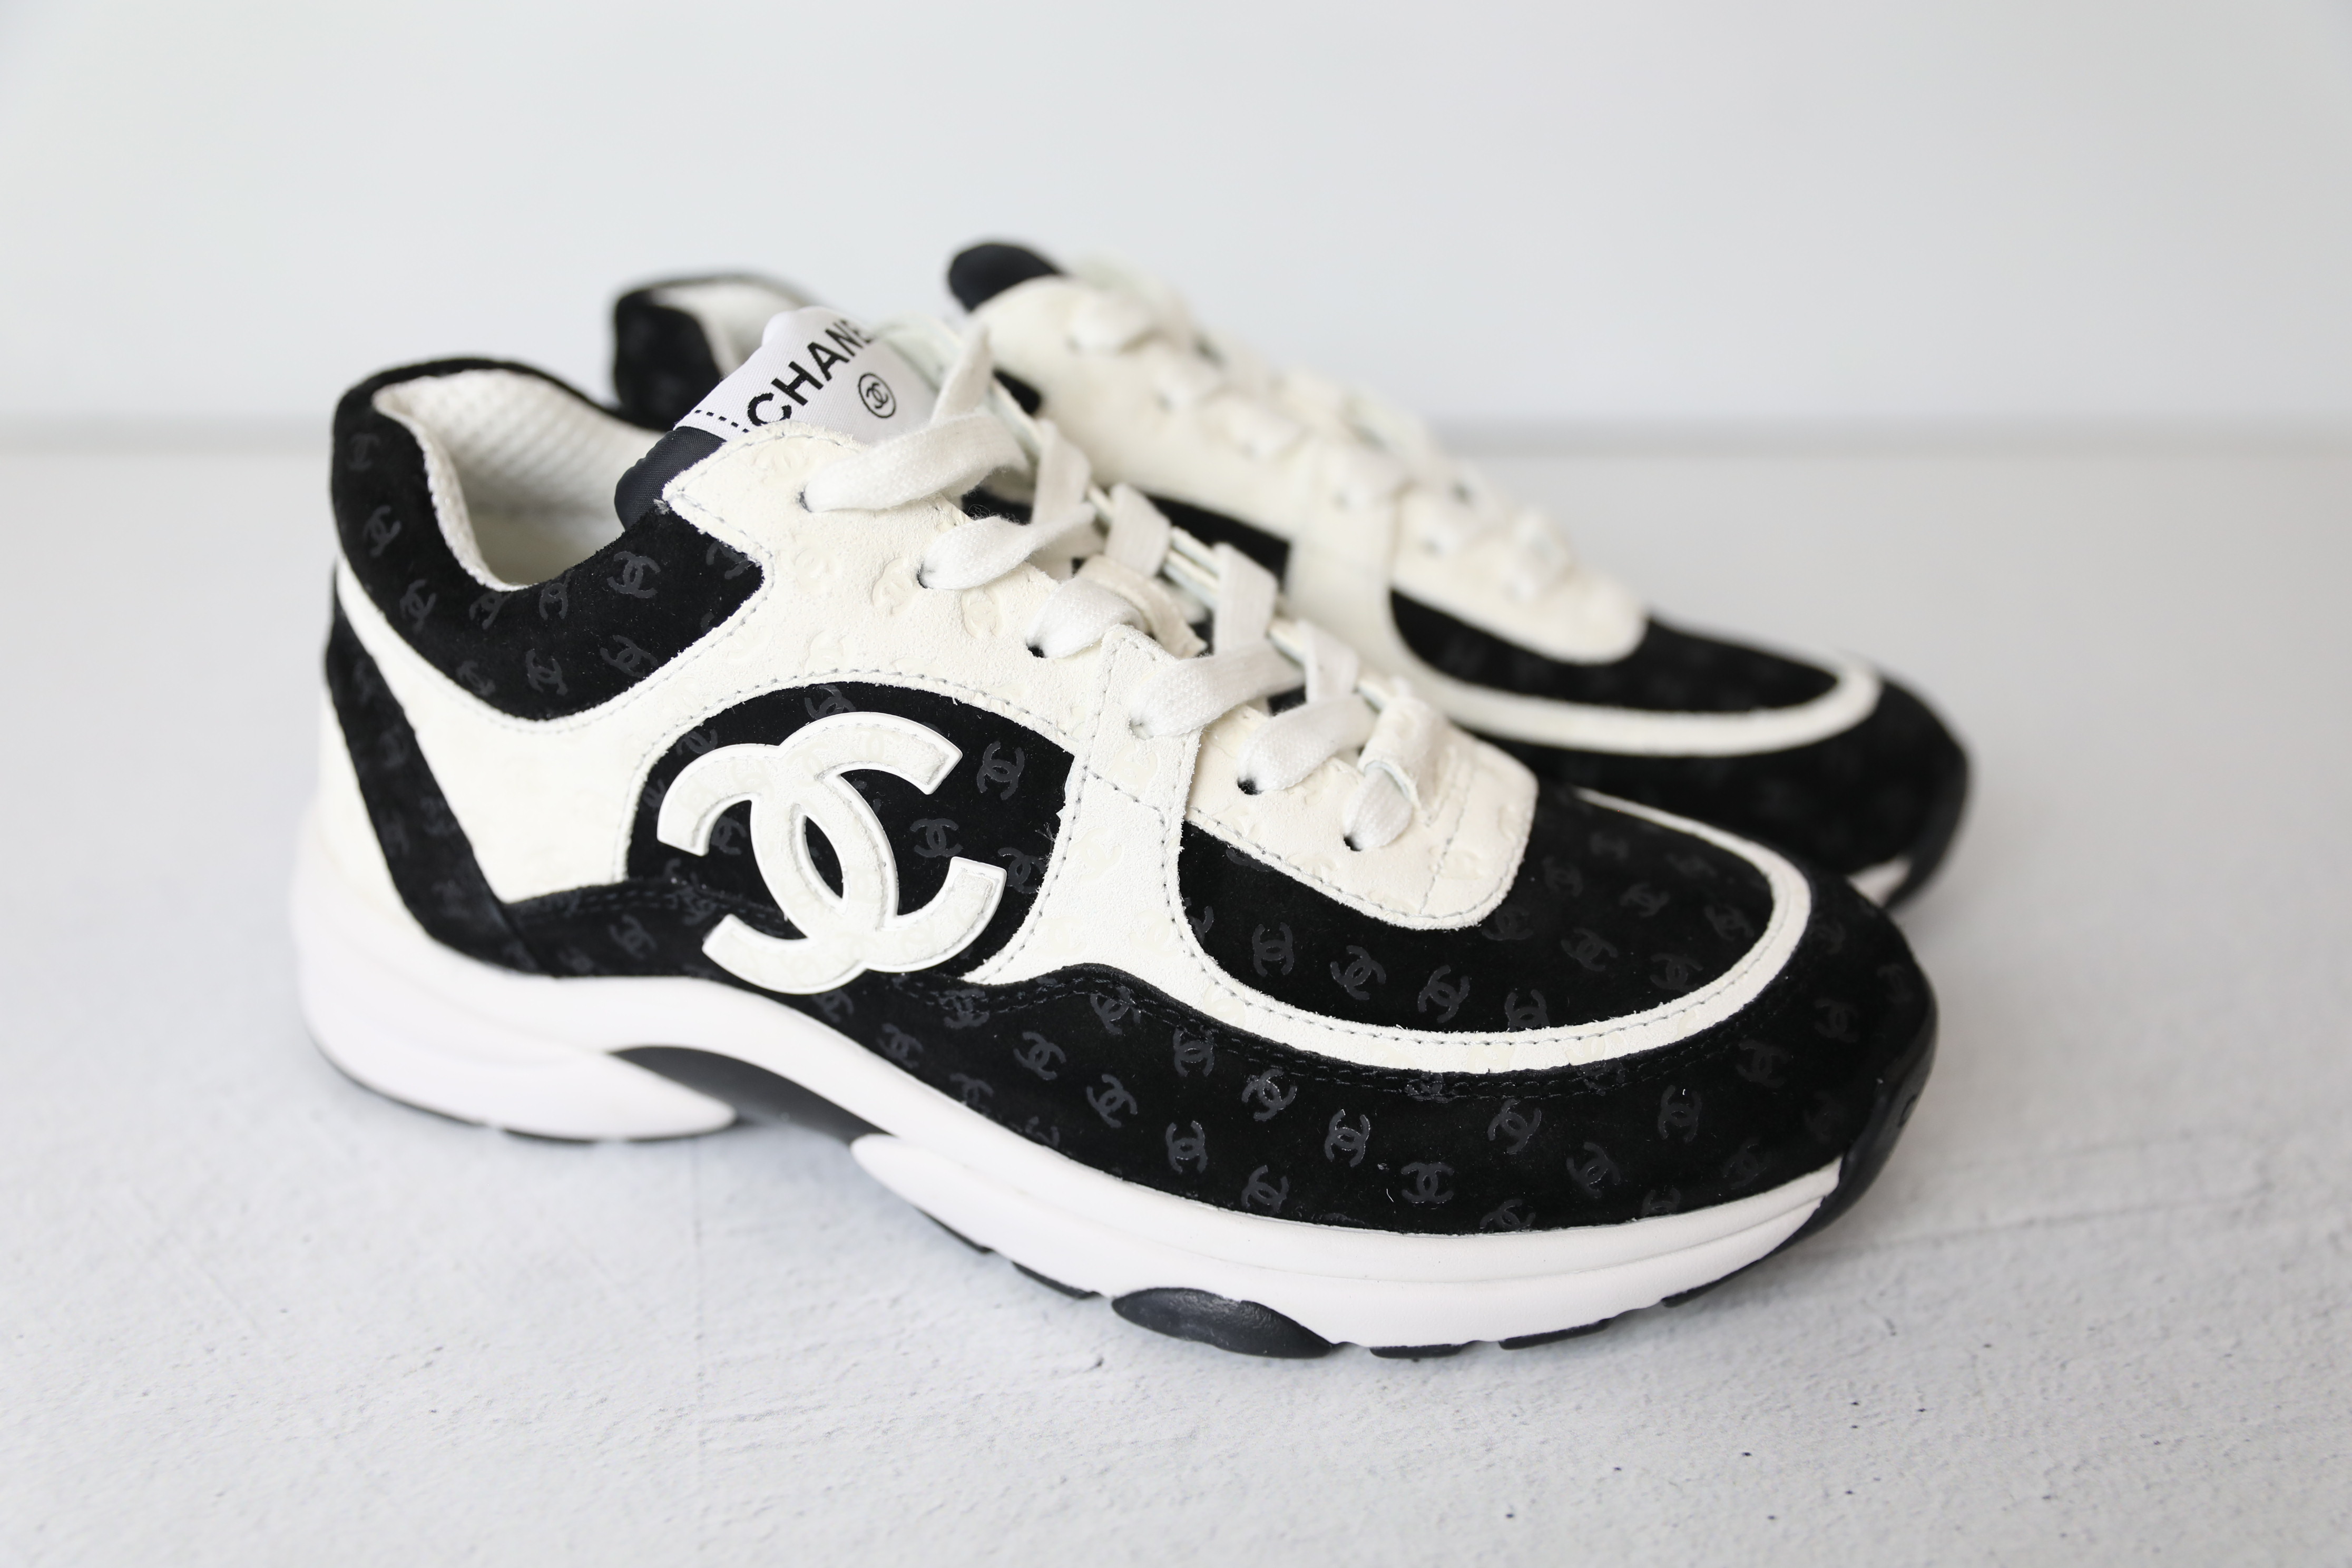 CHANEL, Shoes, Brand New Authentic Chanel Printed Cc Logo Sneakers 36  Black And White